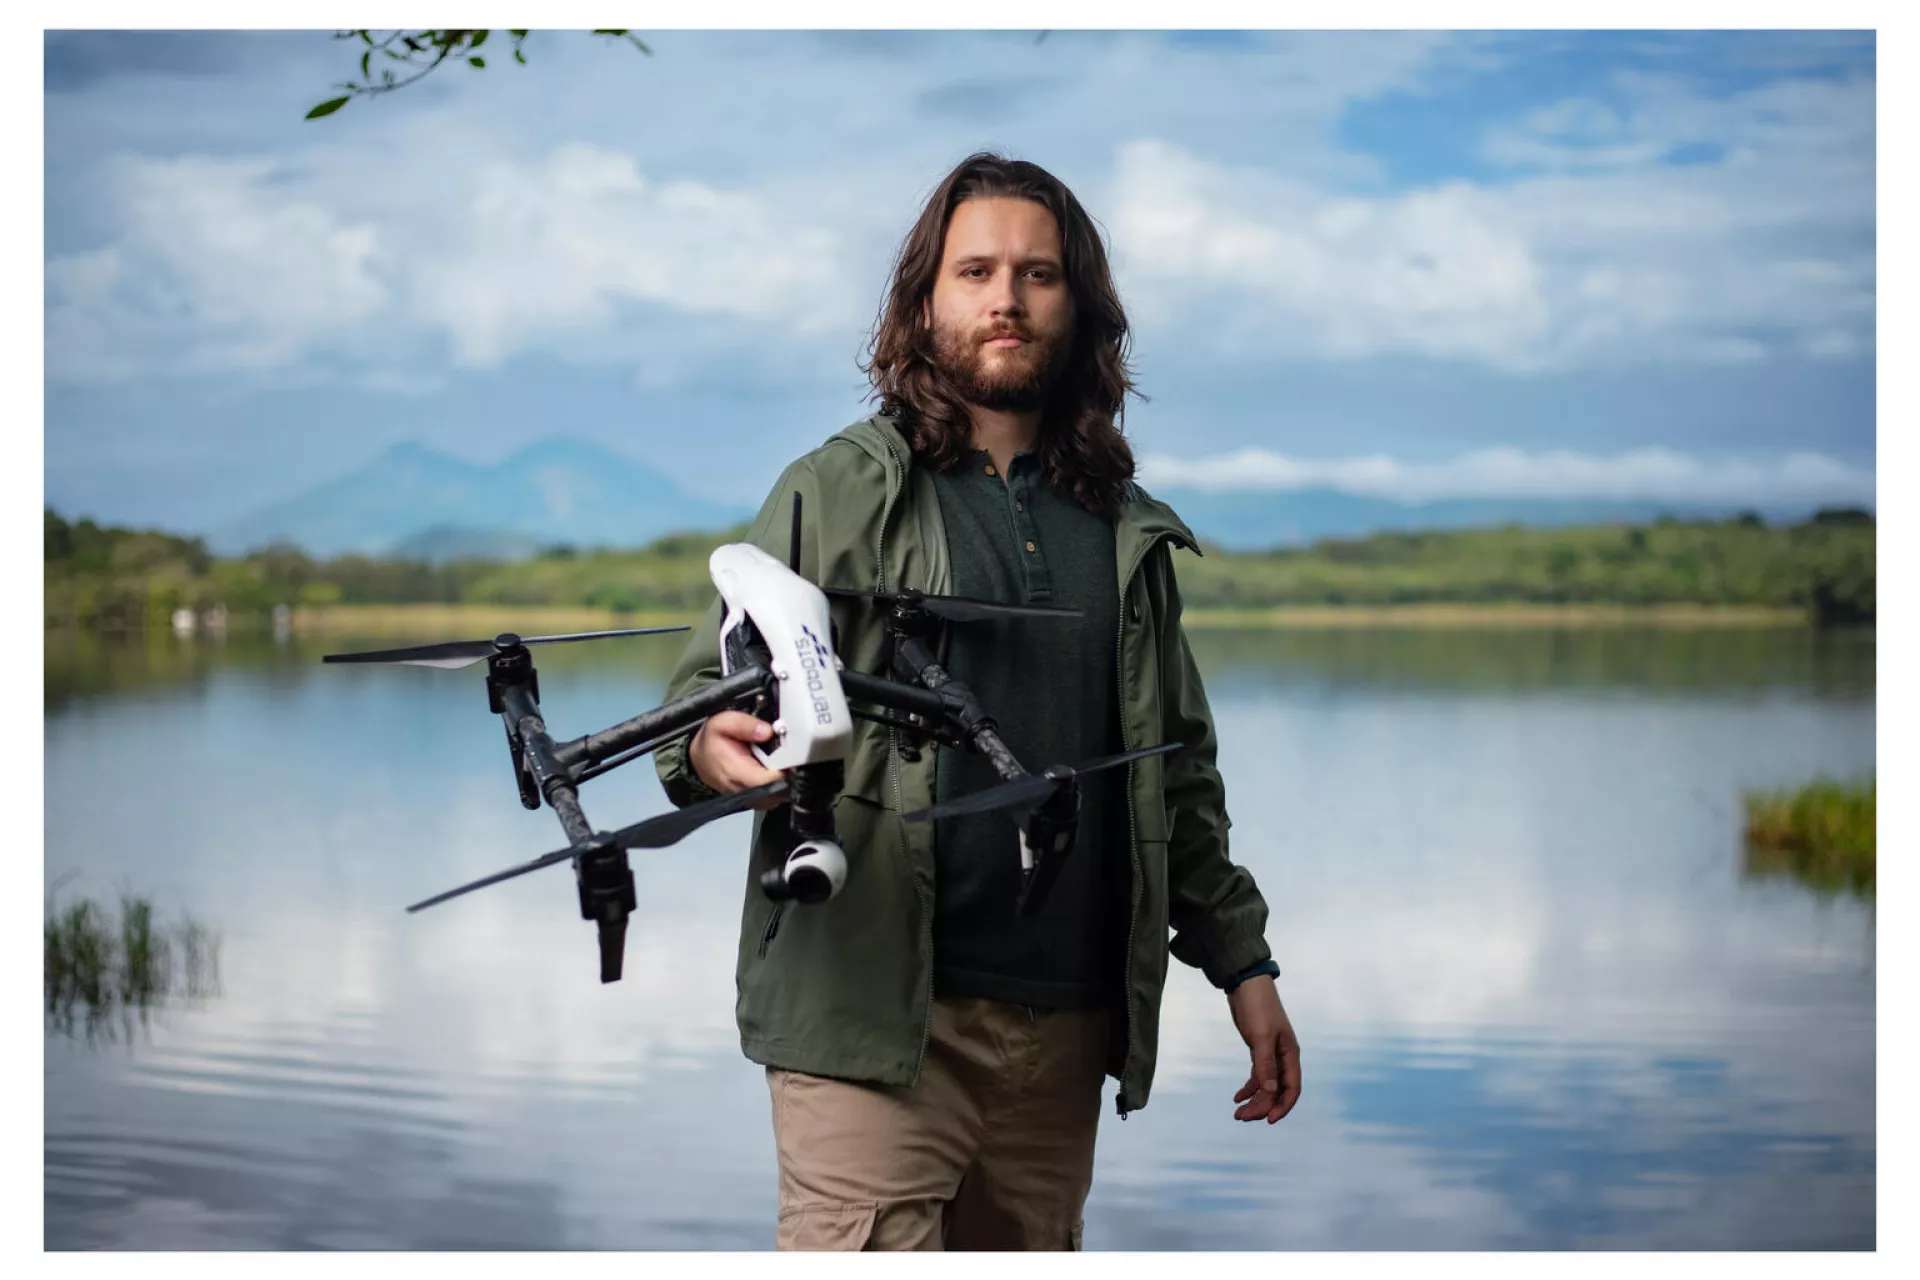 Dan Alvarez, drone engineer from the company Aerobots in Guatemala and team member of the UNICEF-led Dronebots project, stands holding a drone in front of the landscape at Laguna El Pino near Guatemala City, Guatemala